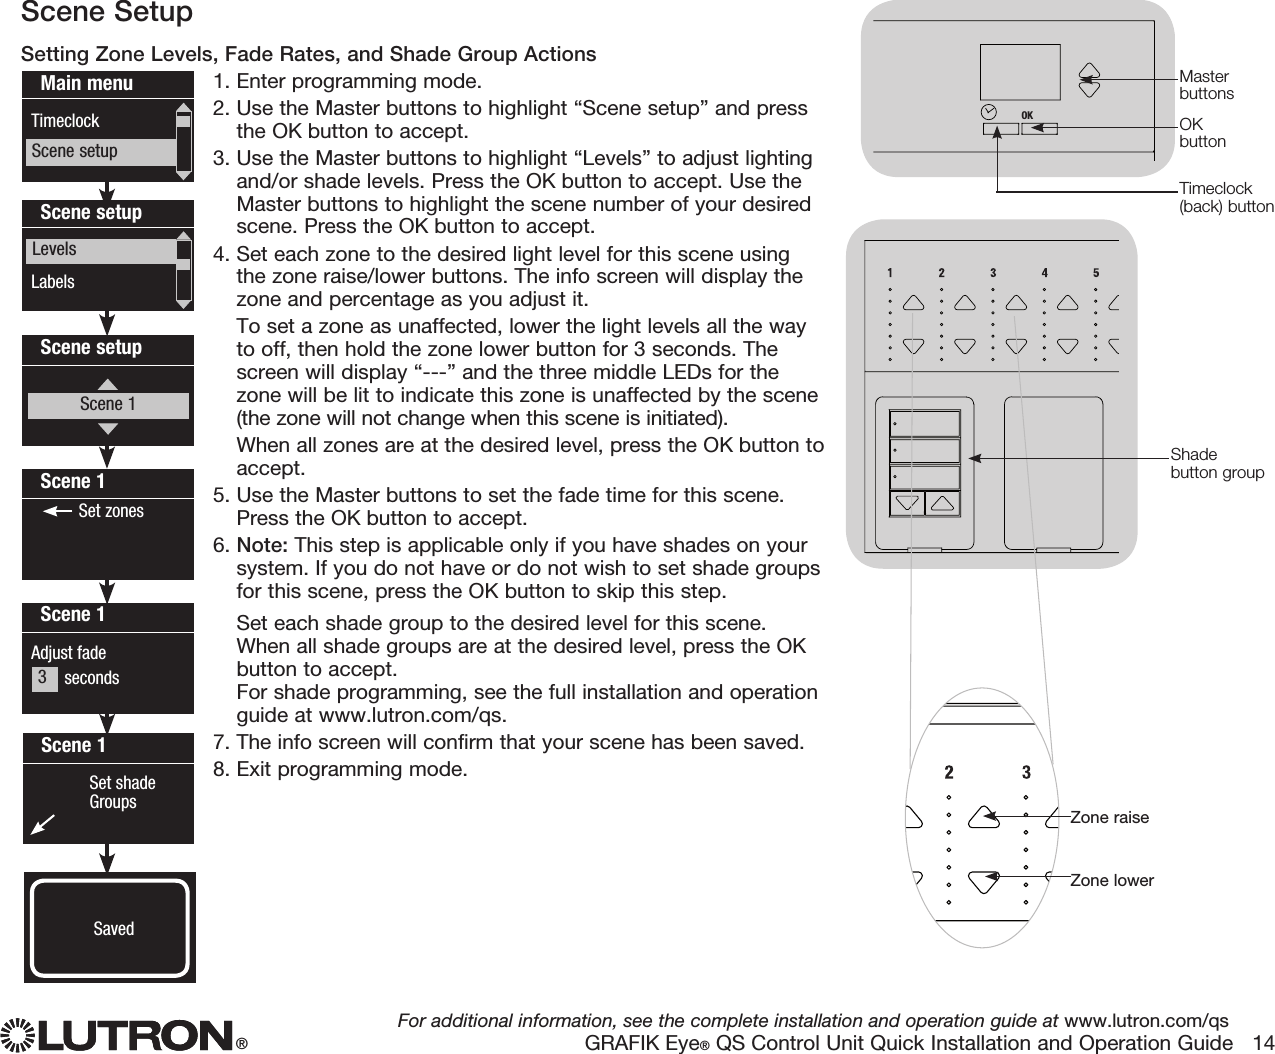 ®For additional information, see the complete installation and operation guide at www.lutron.com/qsGRAFIK Eye® QS Control Unit Quick Installation and Operation Guide   14Scene SetupSetting Zone Levels, Fade Rates, and Shade Group Actions1.  Enter programming mode.2.  Use the Master buttons to highlight “Scene setup” and pressthe OK button to accept.3.  Use the Master buttons to highlight “Levels” to adjust lightingand/or shade levels. Press the OK button to accept. Use theMaster buttons to highlight the scene number of your desiredscene. Press the OK button to accept.4.  Set each zone to the desired light level for this scene usingthe zone raise/lower buttons. The info screen will display thezone and percentage as you adjust it. To set a zone as unaffected, lower the light levels all the wayto off, then hold the zone lower button for 3 seconds. Thescreen will display “---” and the three middle LEDs for thezone will be lit to indicate this zone is unaffected by the scene(the zone will not change when this scene is initiated). When all zones are at the desired level, press the OK button toaccept.5.  Use the Master buttons to set the fade time for this scene.Press the OK button to accept.6.  Note: This step is applicable only if you have shades on yoursystem. If you do not have or do not wish to set shade groupsfor this scene, press the OK button to skip this step.Set each shade group to the desired level for this scene.When all shade groups are at the desired level, press the OKbutton to accept.For shade programming, see the full installation and operationguide at www.lutron.com/qs.7.  The info screen will confirm that your scene has been saved.8.  Exit programming mode.Main menuTimeclockScene setupScene setupLabelsLevelsScene 1Adjust fade       secondsScene 1 Set shade Groups 3   secondsScene 1 Set zonesScene setupScene 1Saved3Shade button groupOKOKZone raiseZone lowerOKMaster buttonsOK buttonTimeclock (back) button